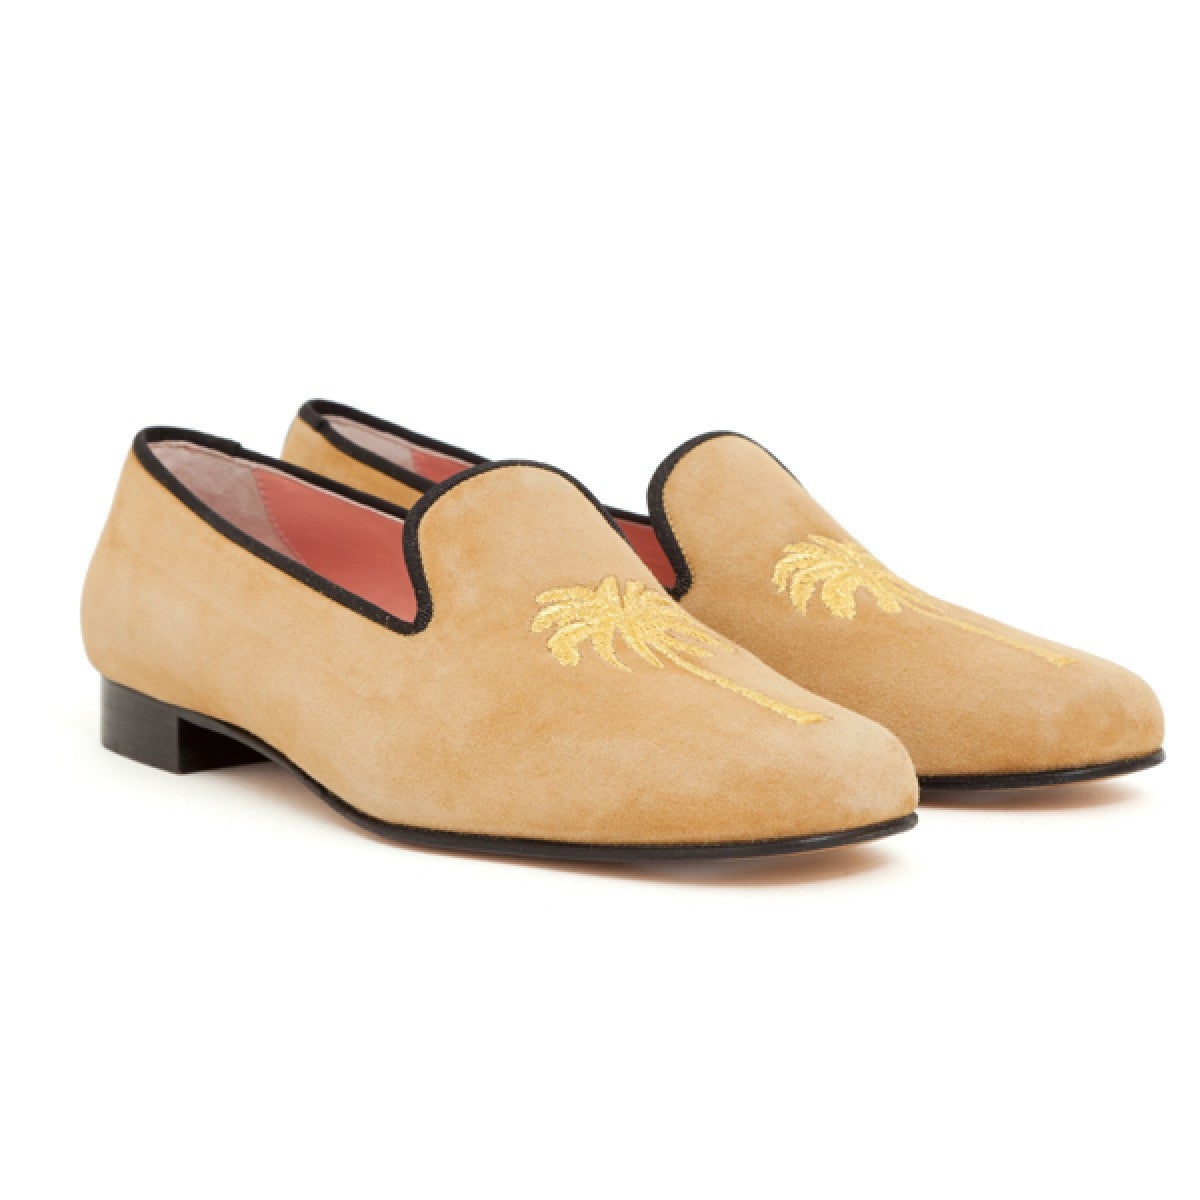 DANDY SLIPPER PALM TREE, Footwear, Penelope Chilvers - Hickman & Bousfield, Safari and Travel Clothing